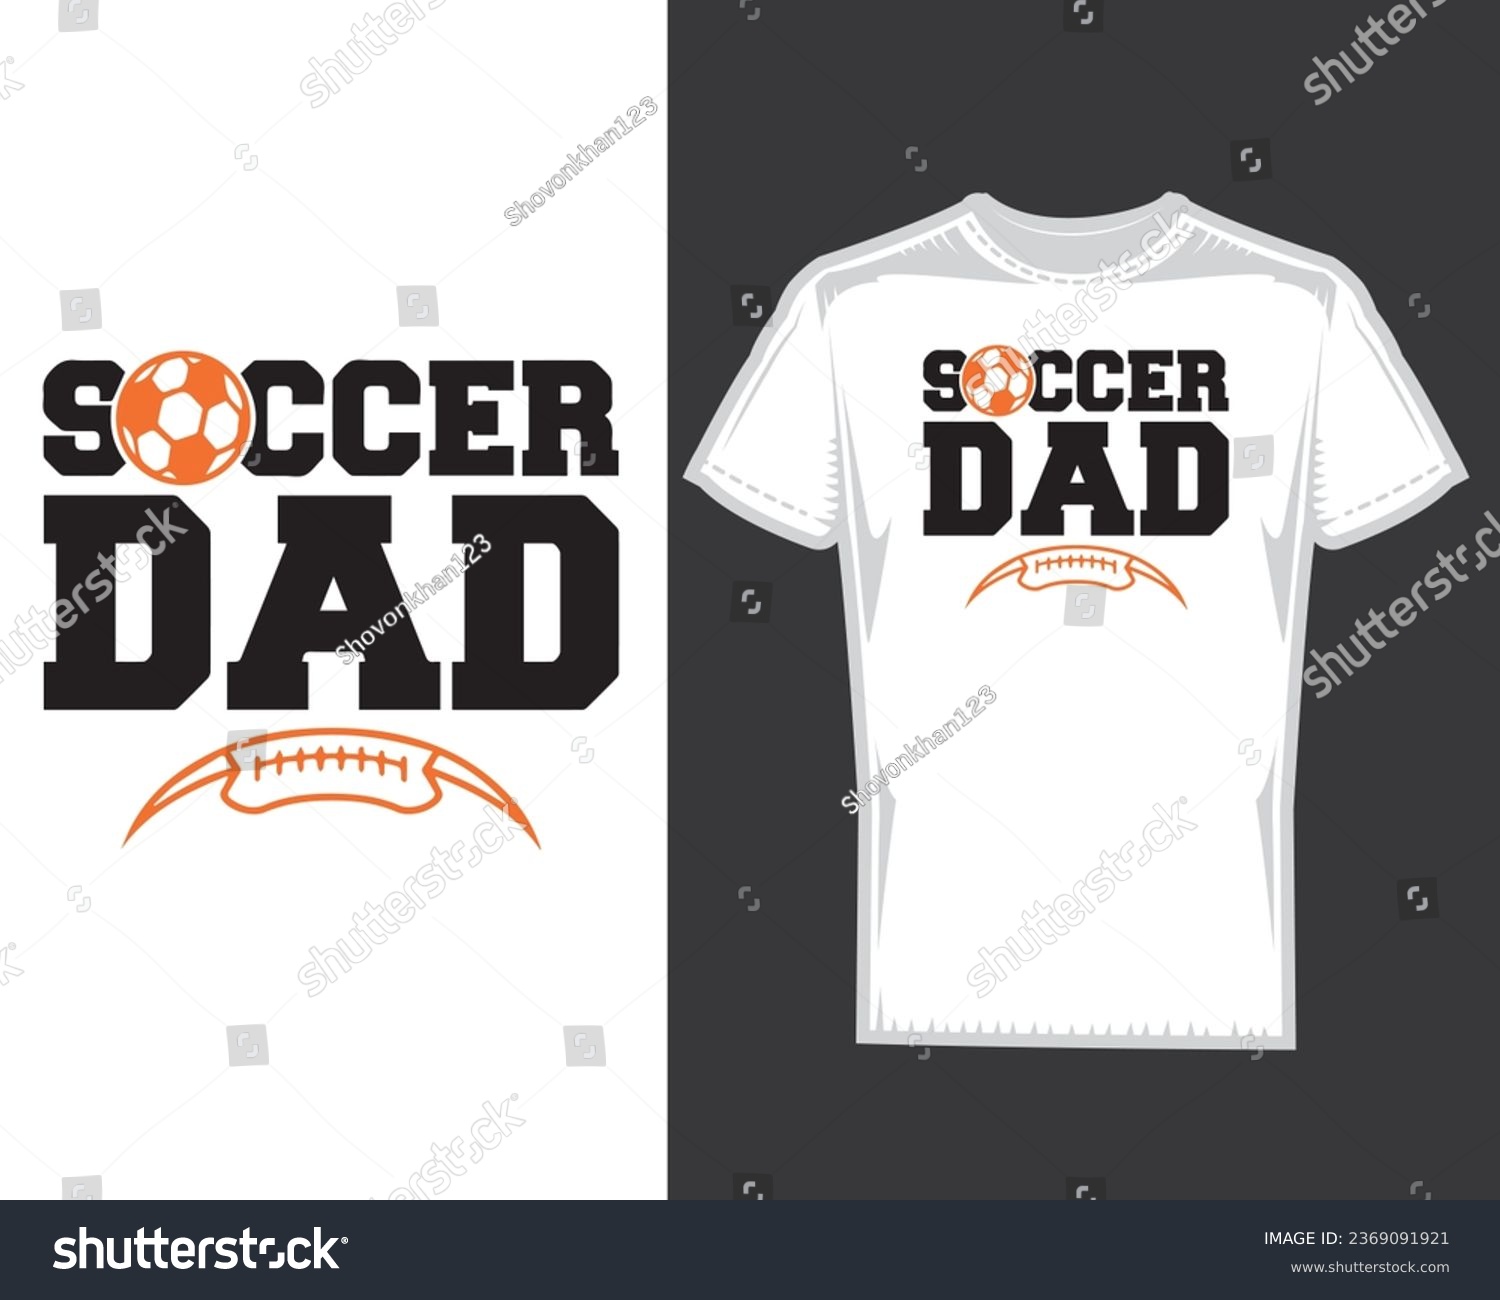 SVG of Soccer Dad Files | Soccer Dad Cut Files and Soccer Dad Vector Files svg